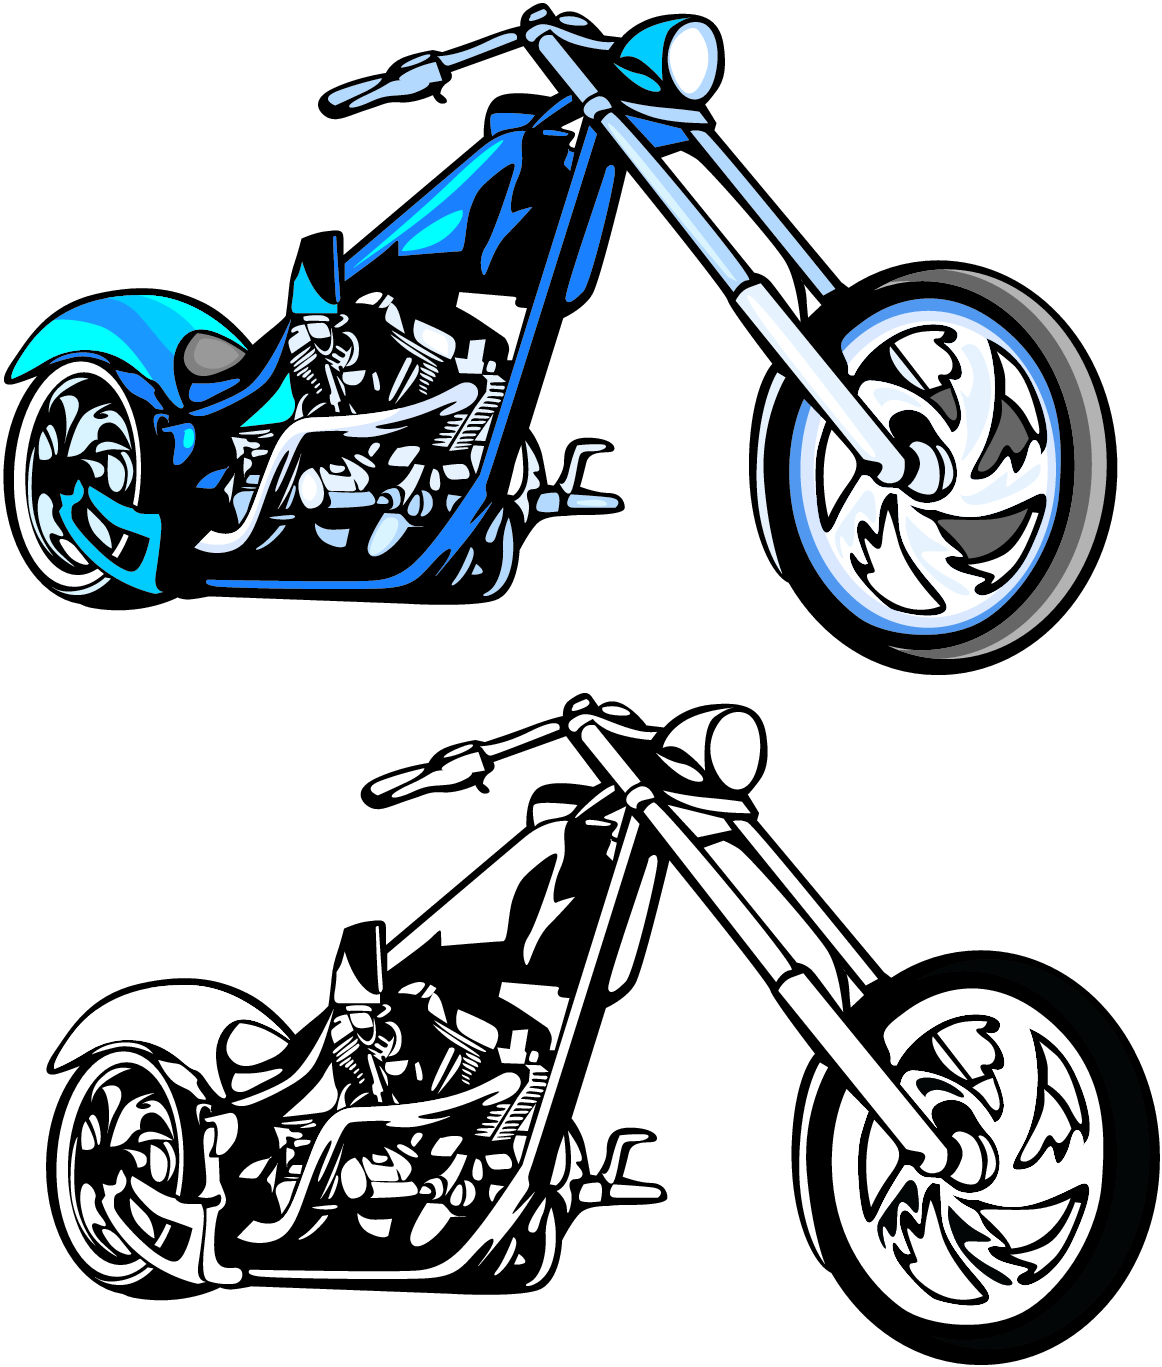 Motorcycle Chopper Clipart Background 1 Hd Wallpapers - Harley Davidson Chopper Clipart - HD Wallpaper 